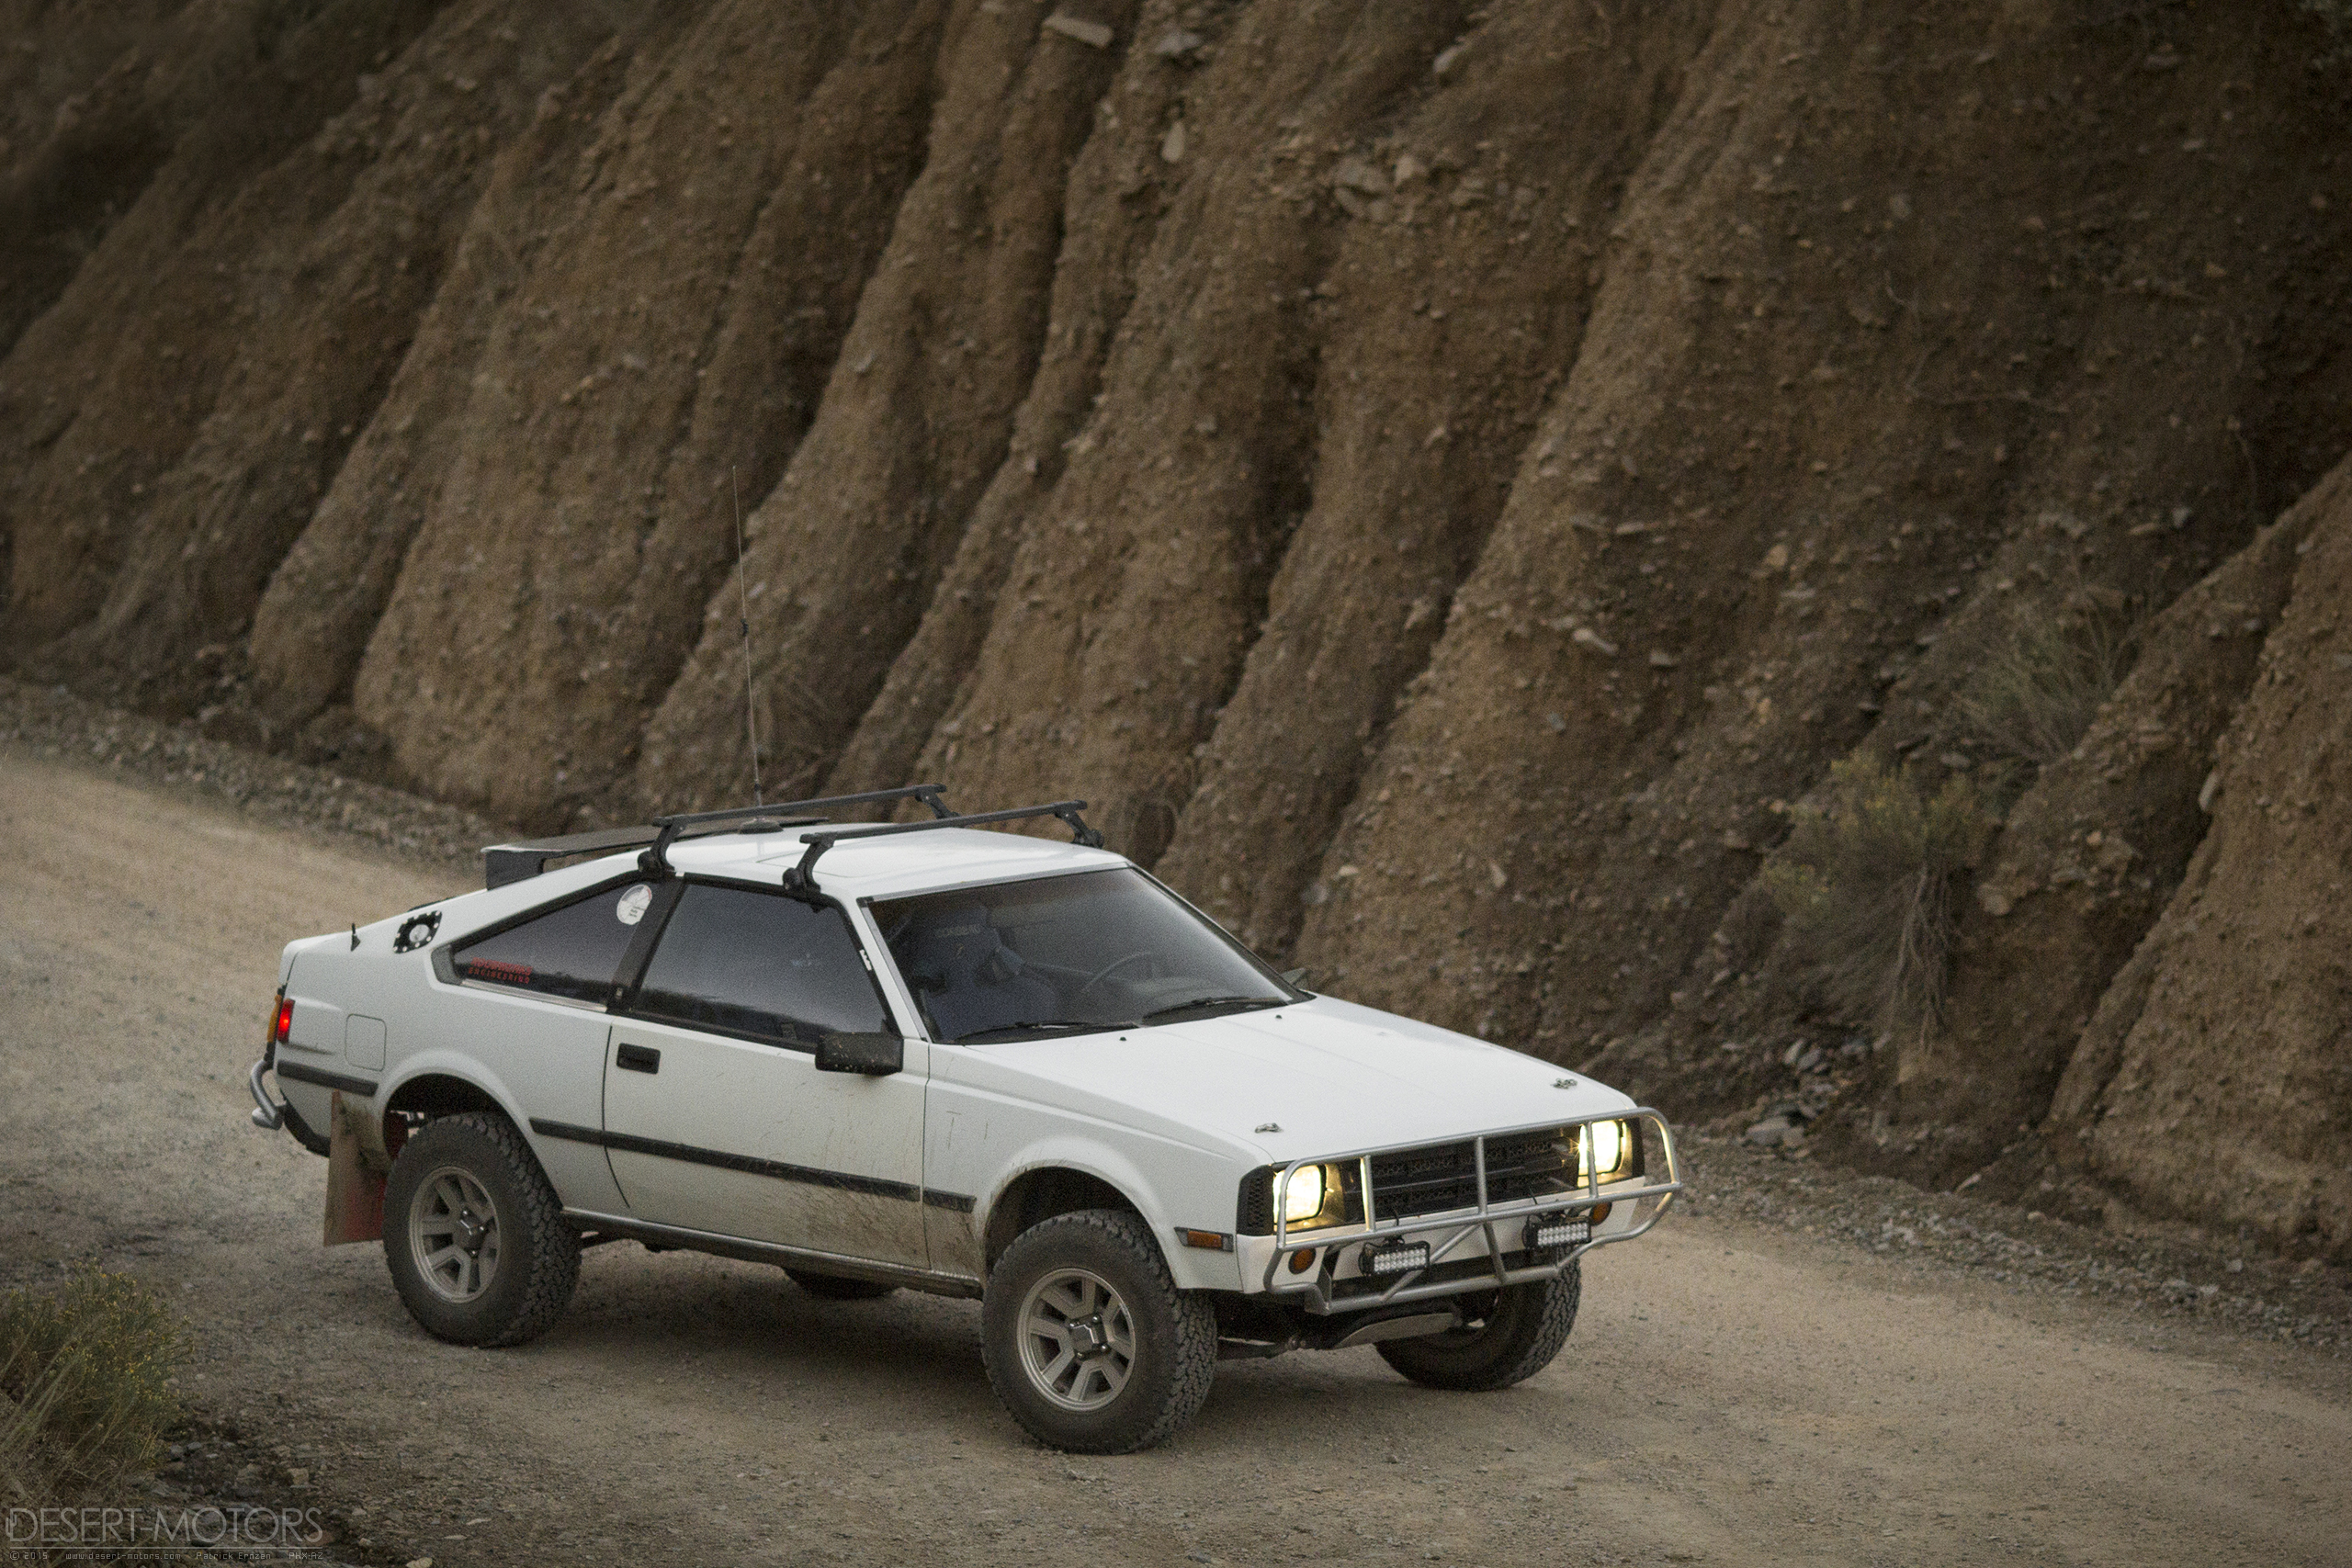 Toyota Toyota Celica Rally Cars Rally Dirt Road Dessert White Cars Japanese Cars Old Car 2560x1707